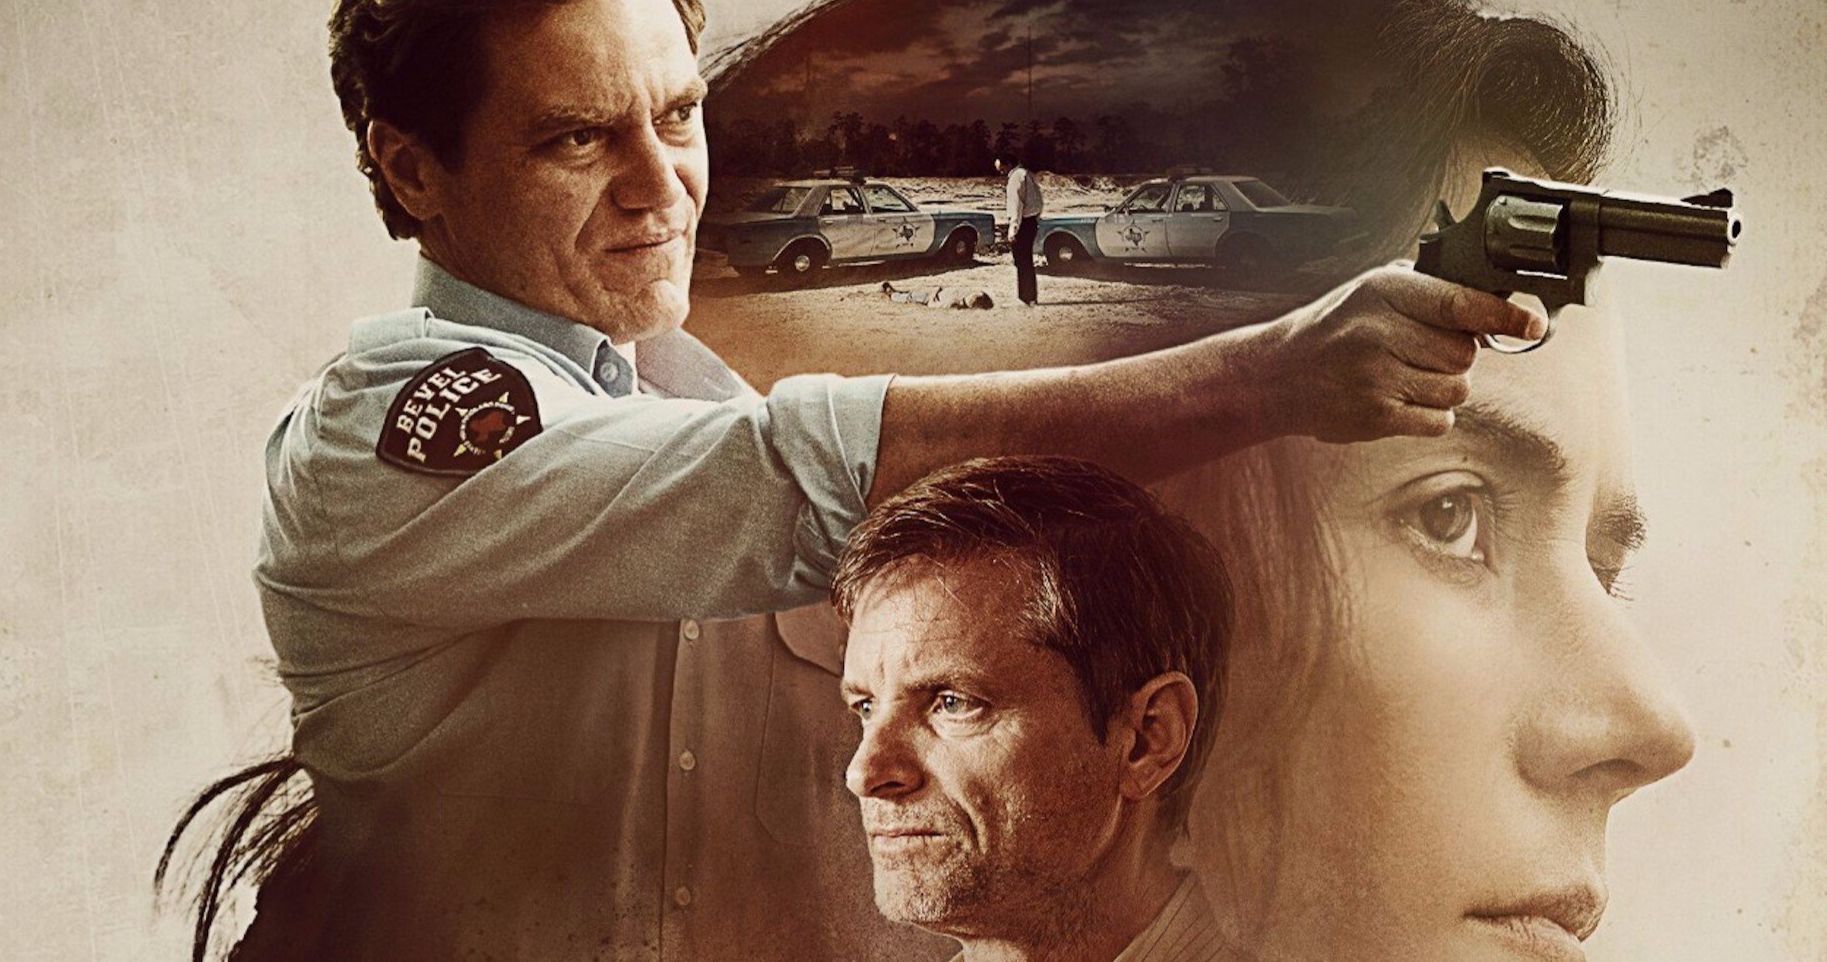 The Quarry Review: Shea Whigham and Michael Shannon Heat Up This Slow Burn Thriller